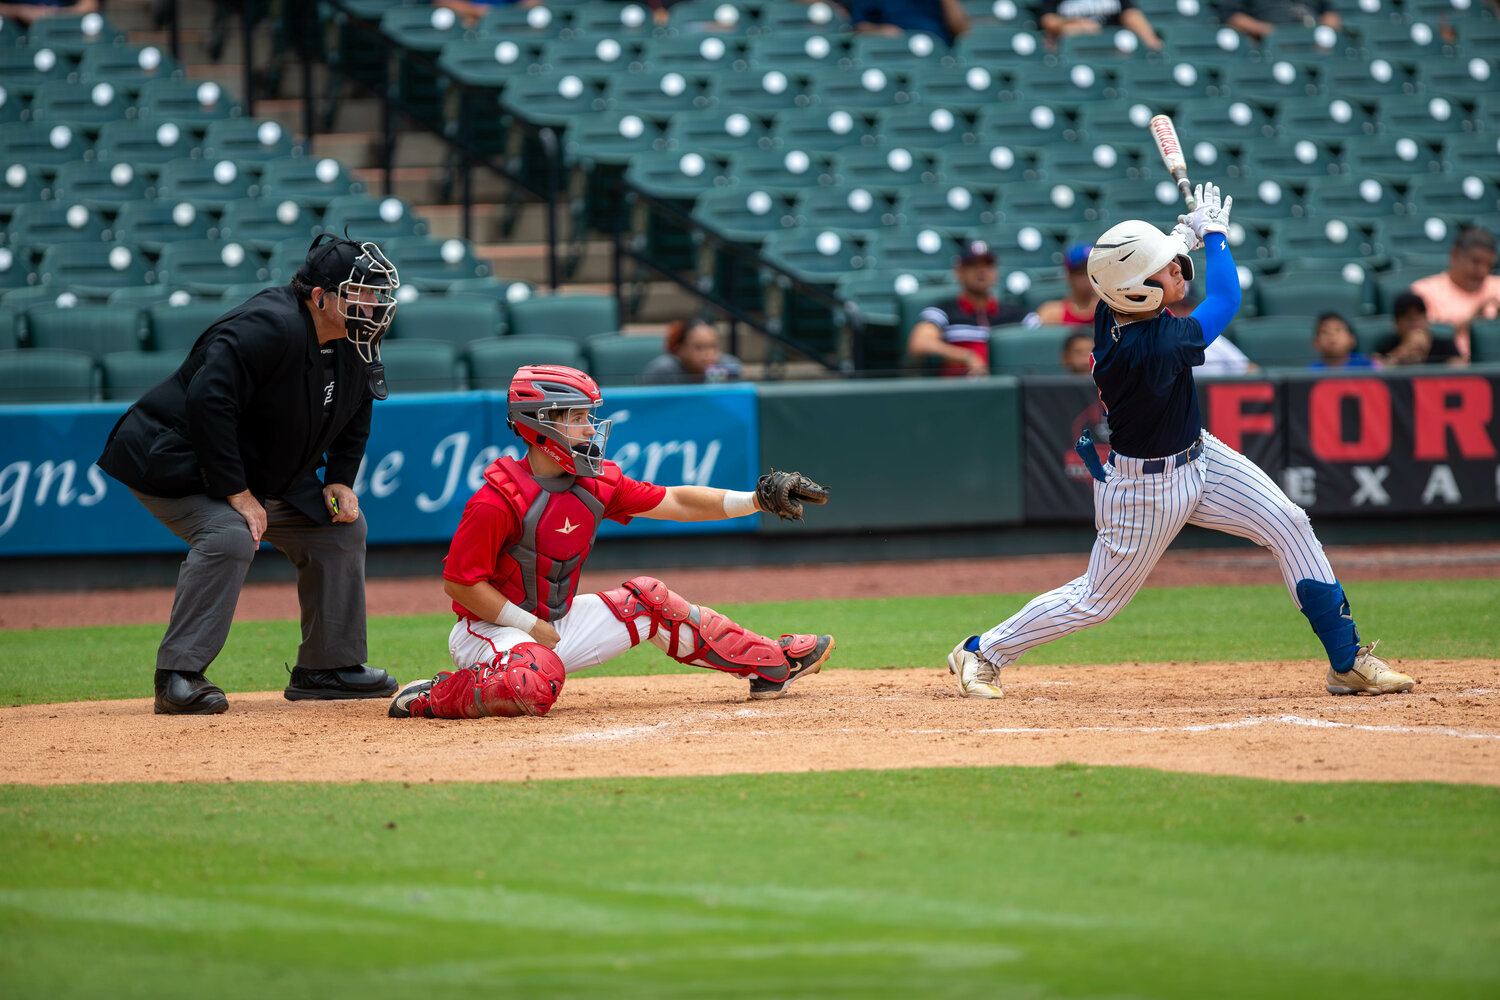 Brady Englett catches during Tuesday's GHBCA Senior All-Star game at Constellation Field in Sugar Land.